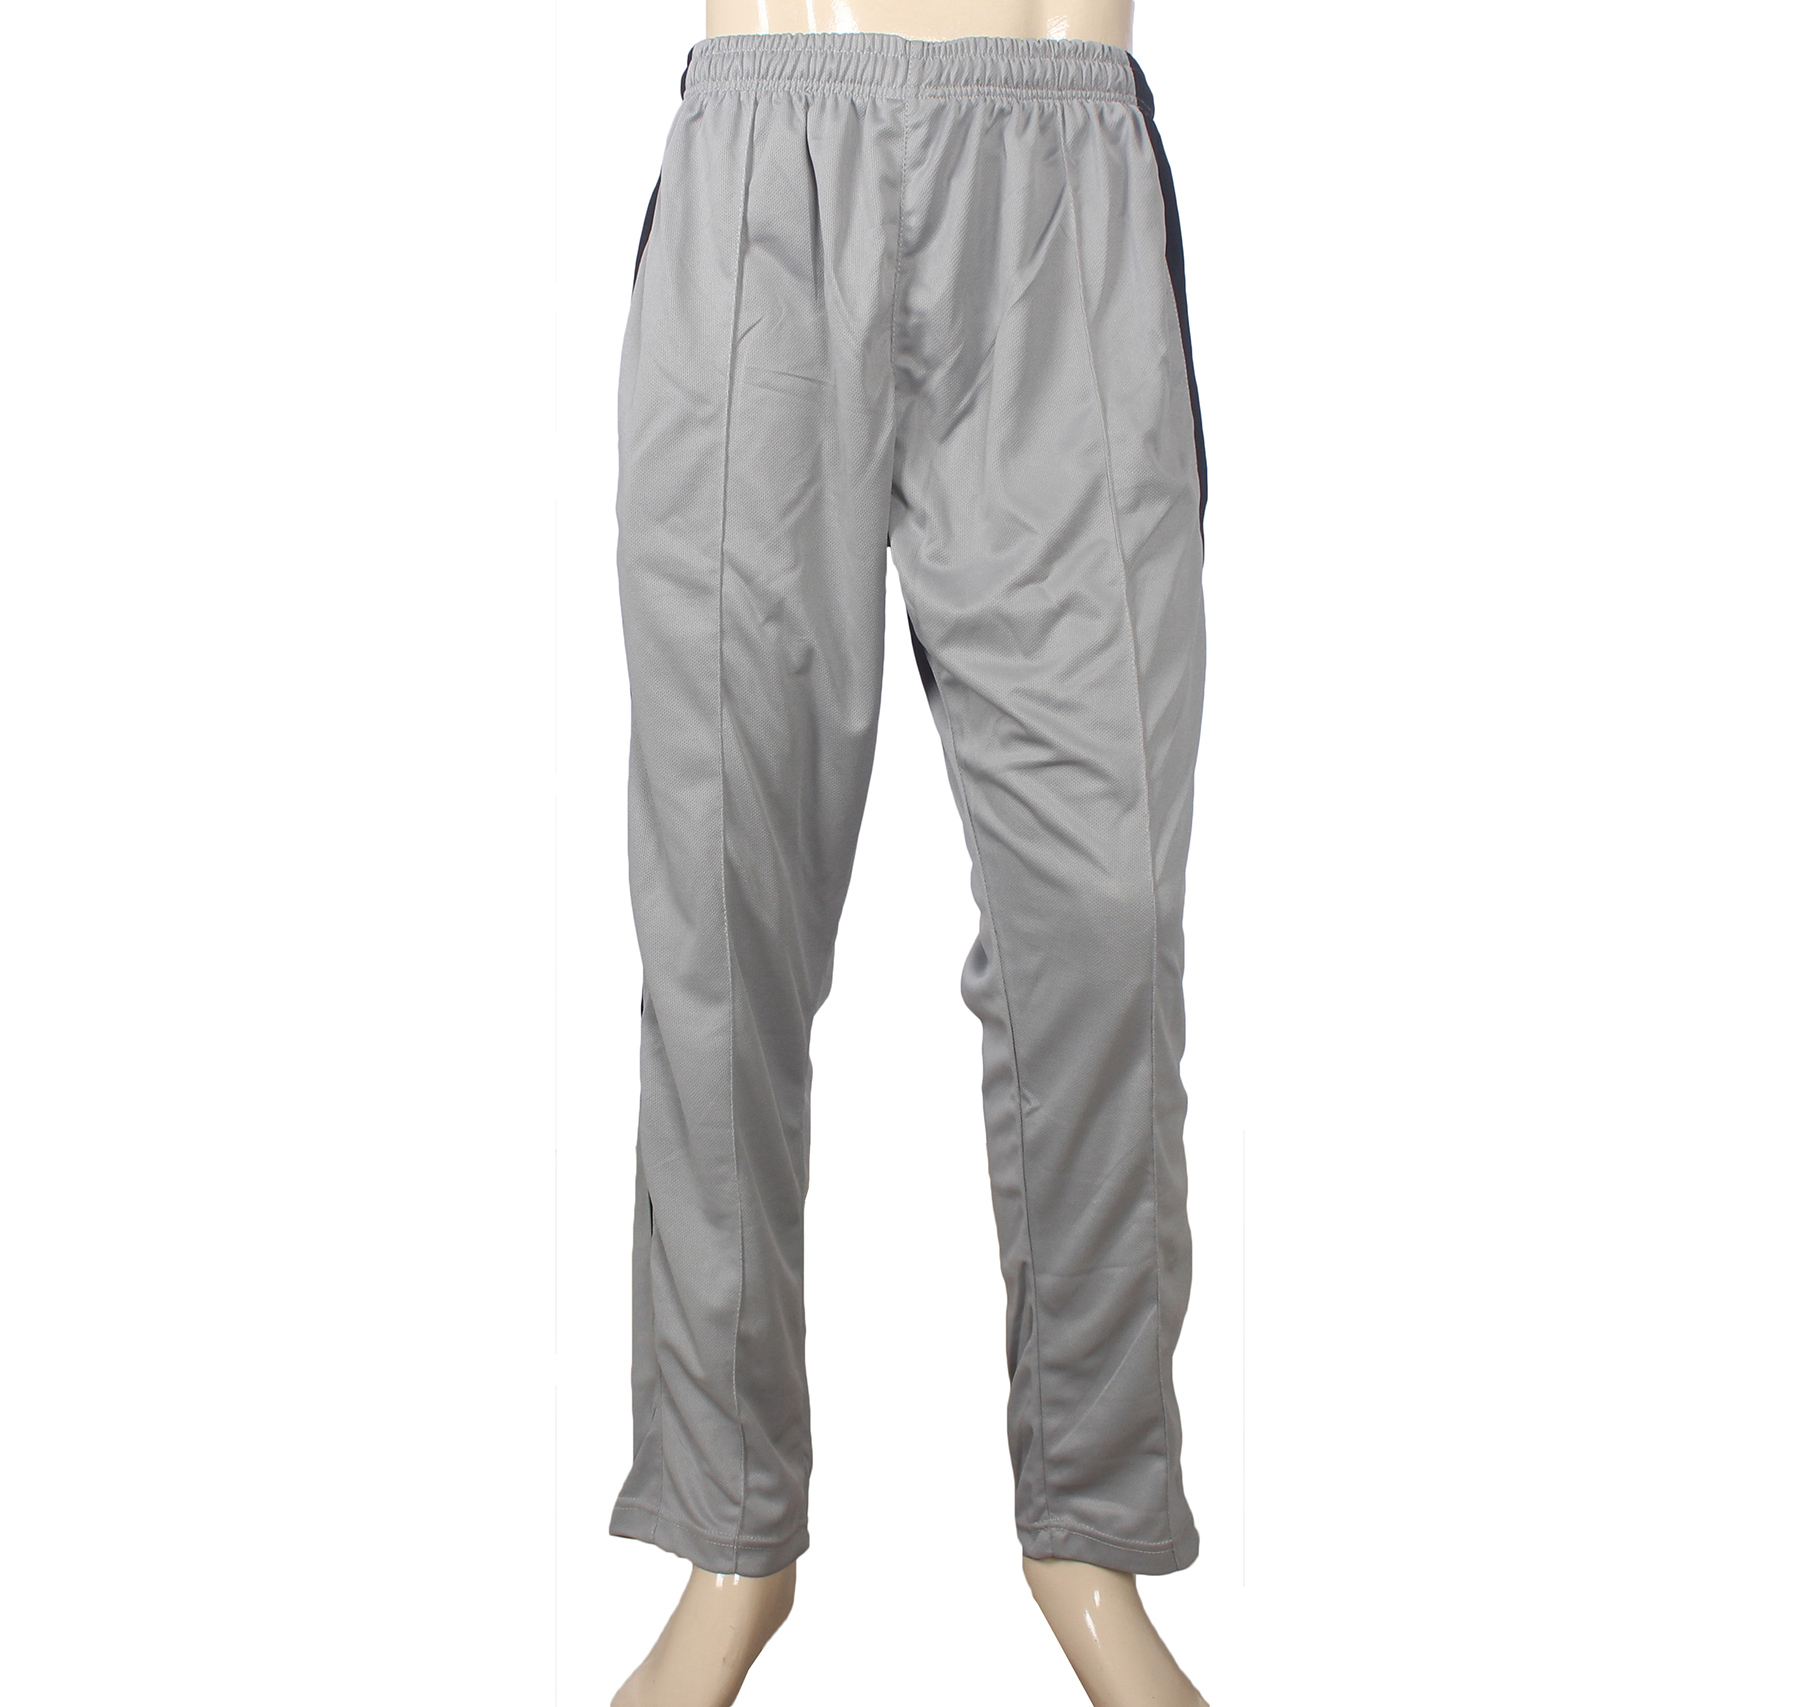 Adidas Trousers Archives - Sports Ghar Online Sports Shopping Store: